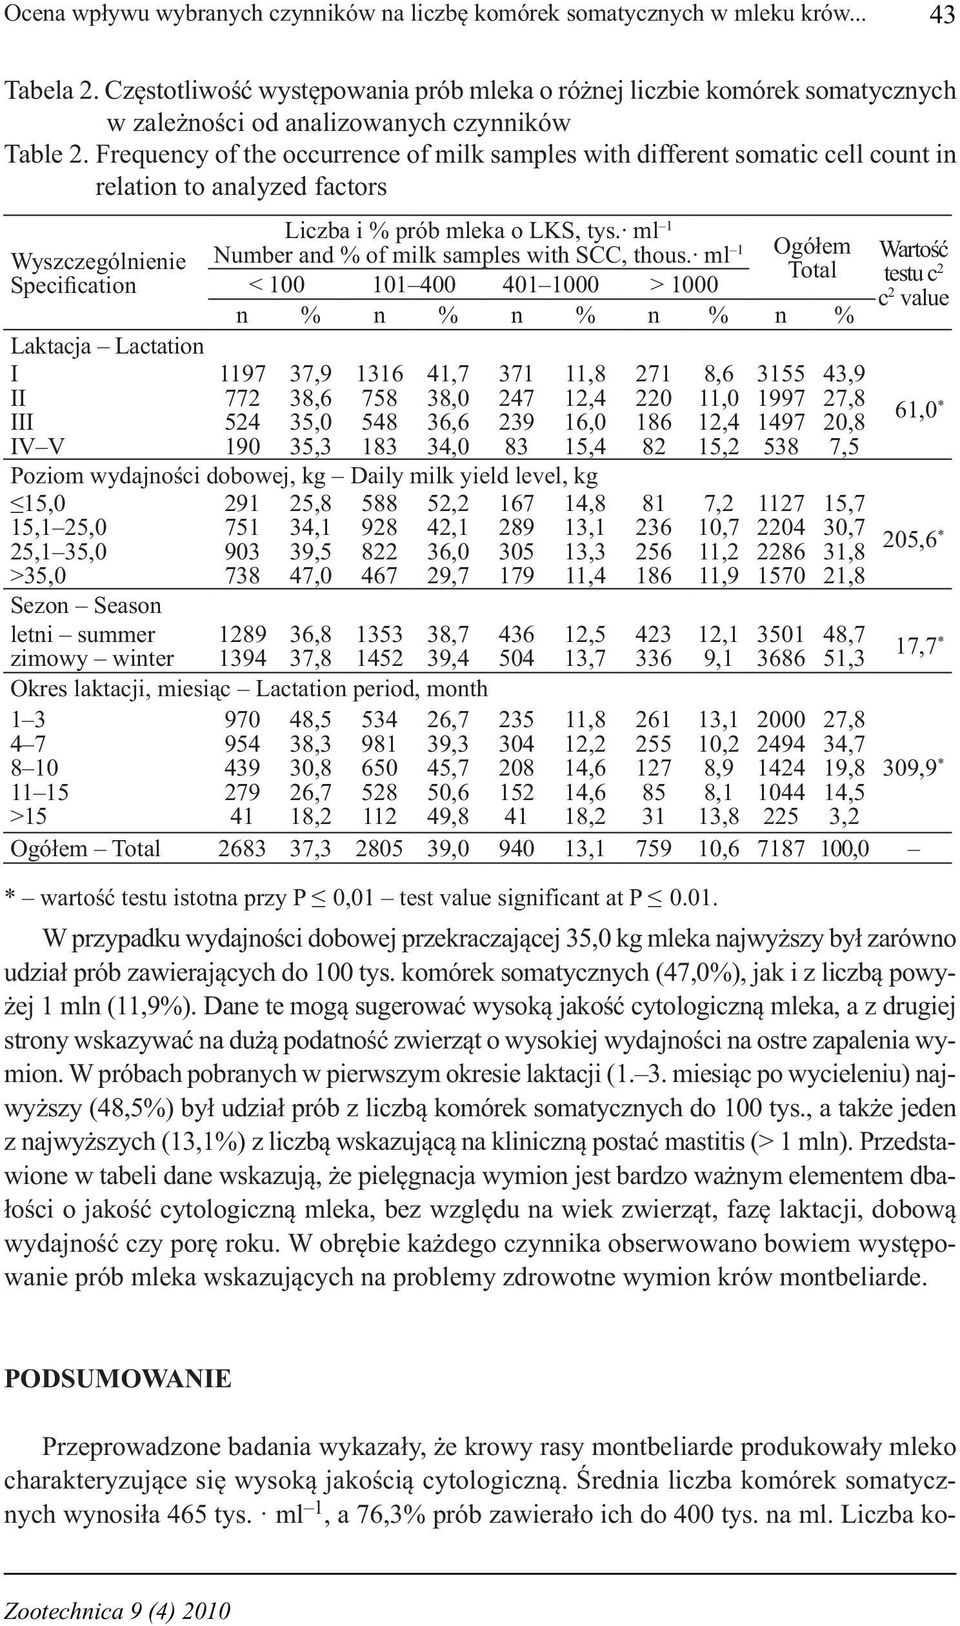 Frequency of the occurrence of milk samples with different somatic cell count in relation to analyzed factors Wyszczególnienie Specification Laktacja Lactation I II III IV V Liczba i % prób mleka o